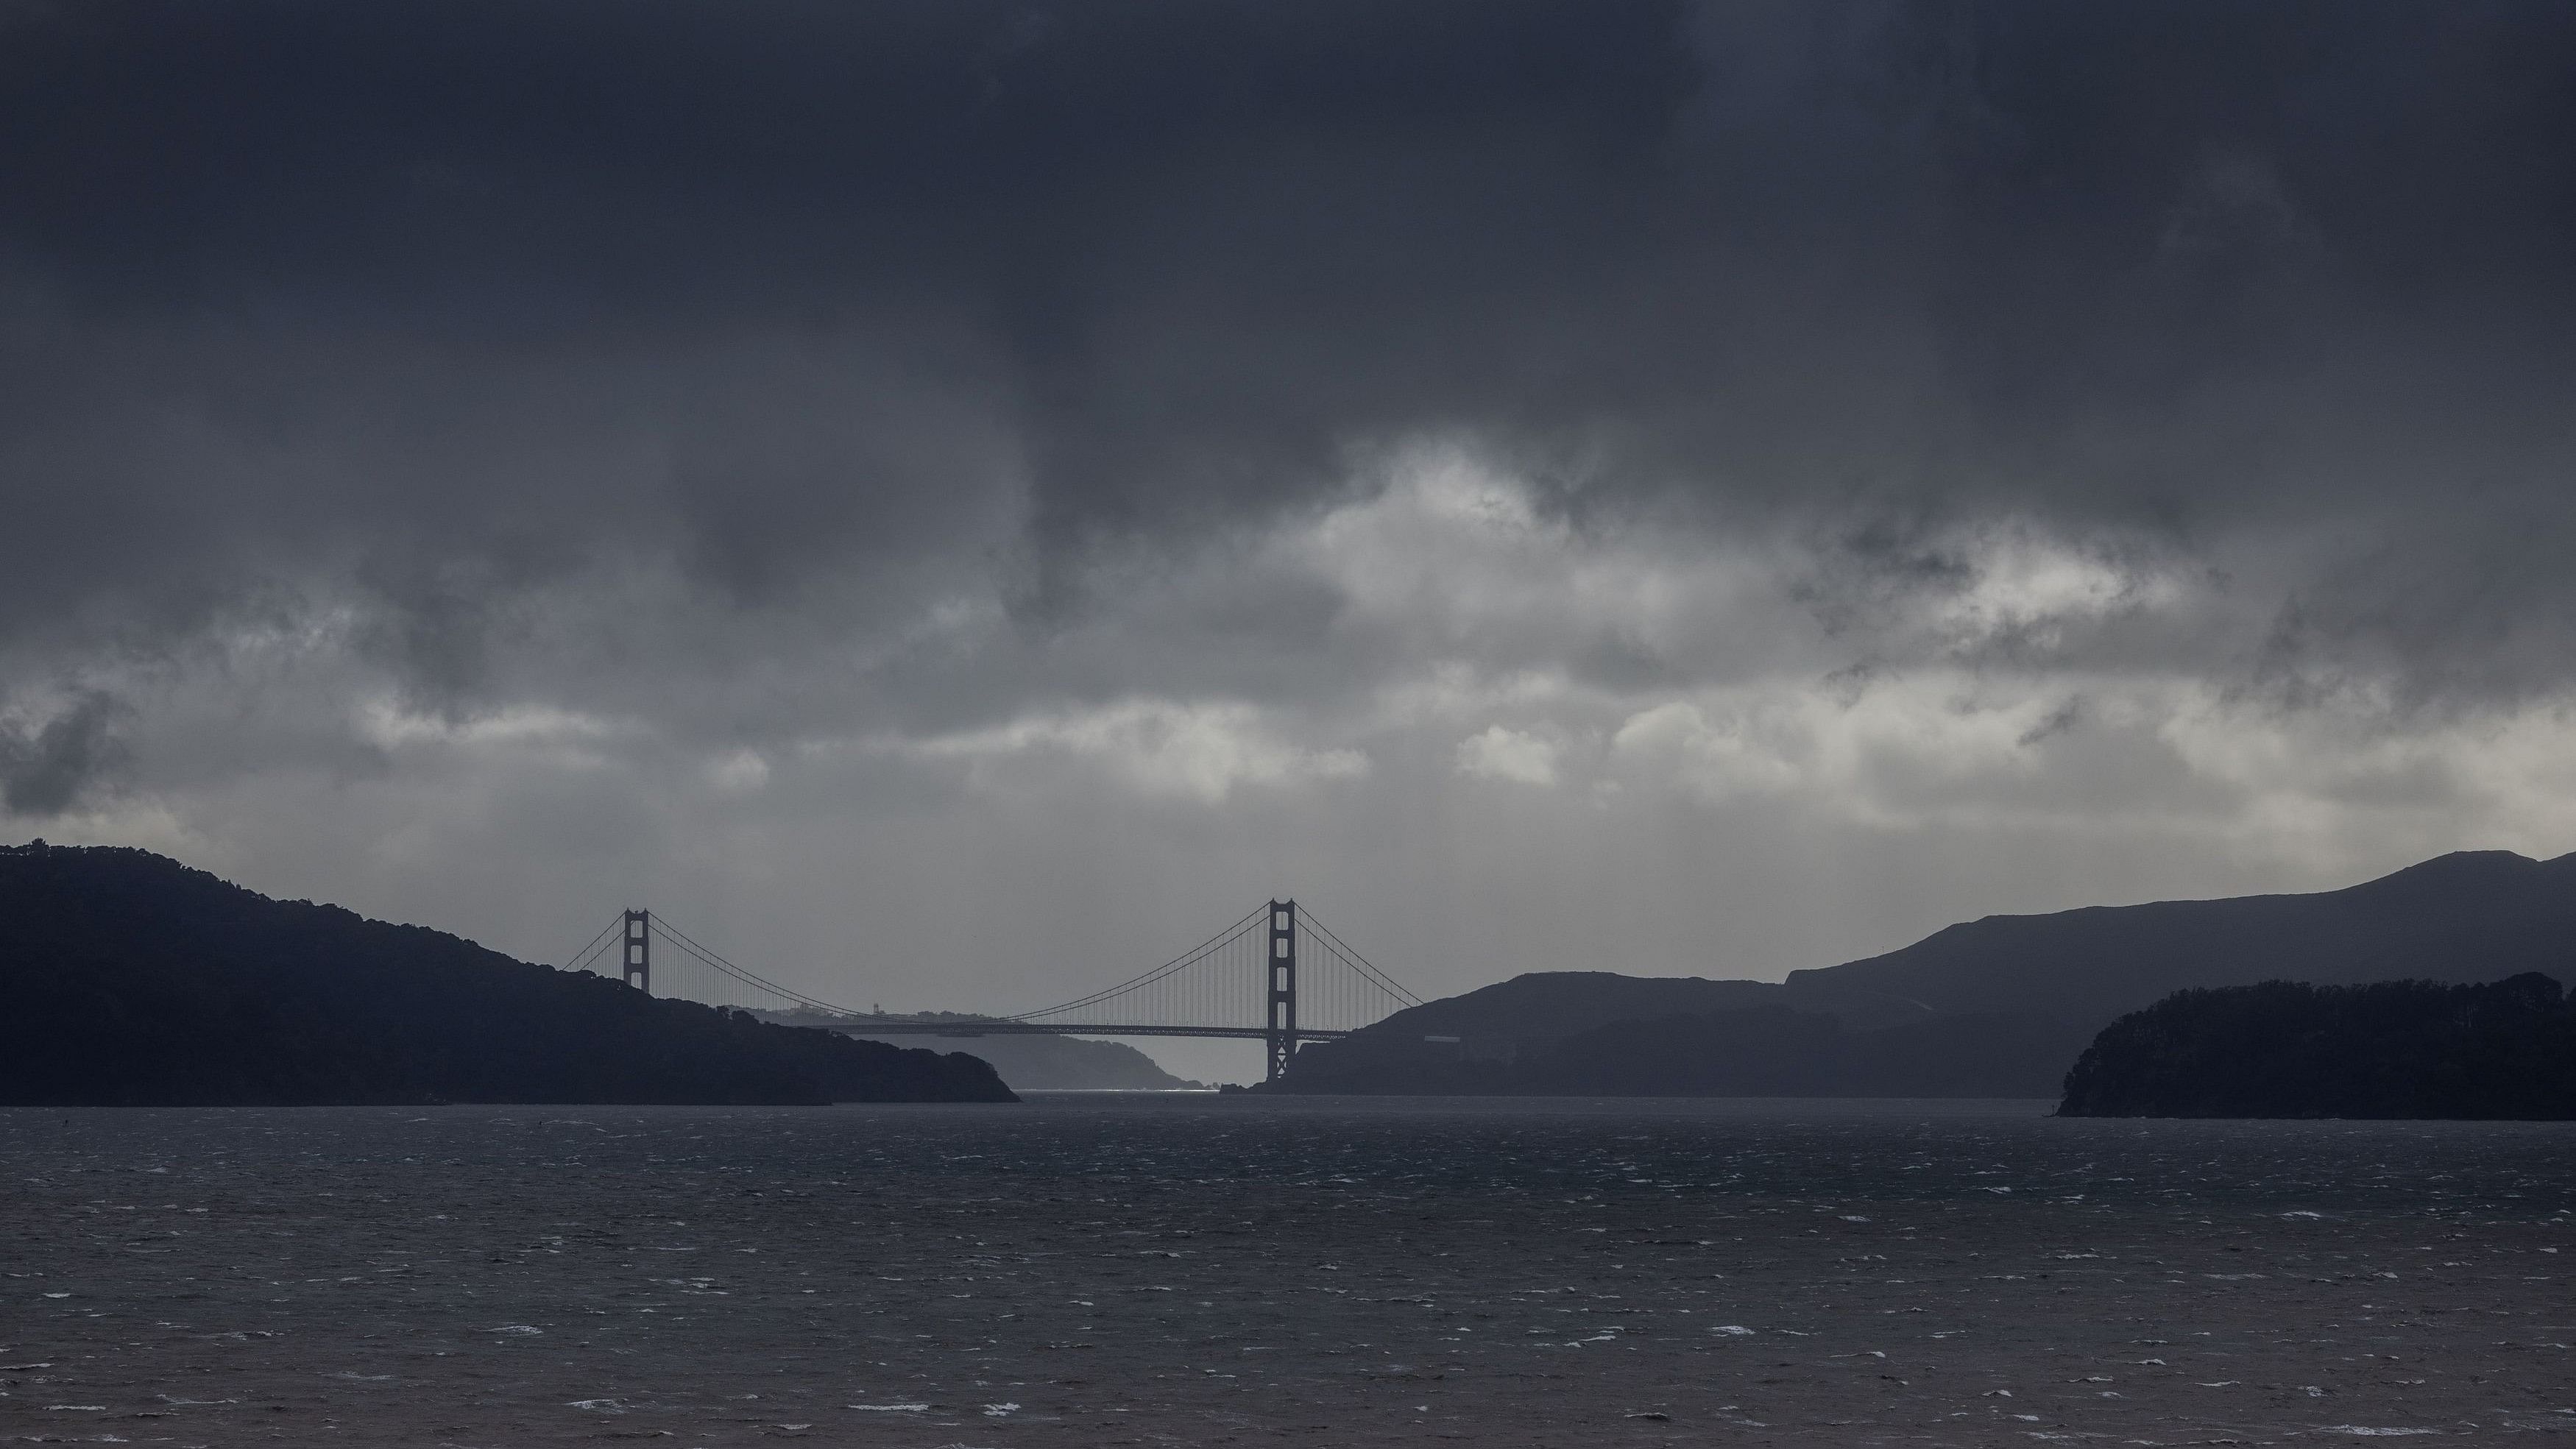 <div class="paragraphs"><p>Darks clouds are seen over the Golden Gate bridge as a Pacific storm known as an 'Atmospheric River' approaches northern California, bringing heavy rains and winds that could trigger widespread flooding, in San Francisco, California.</p></div>